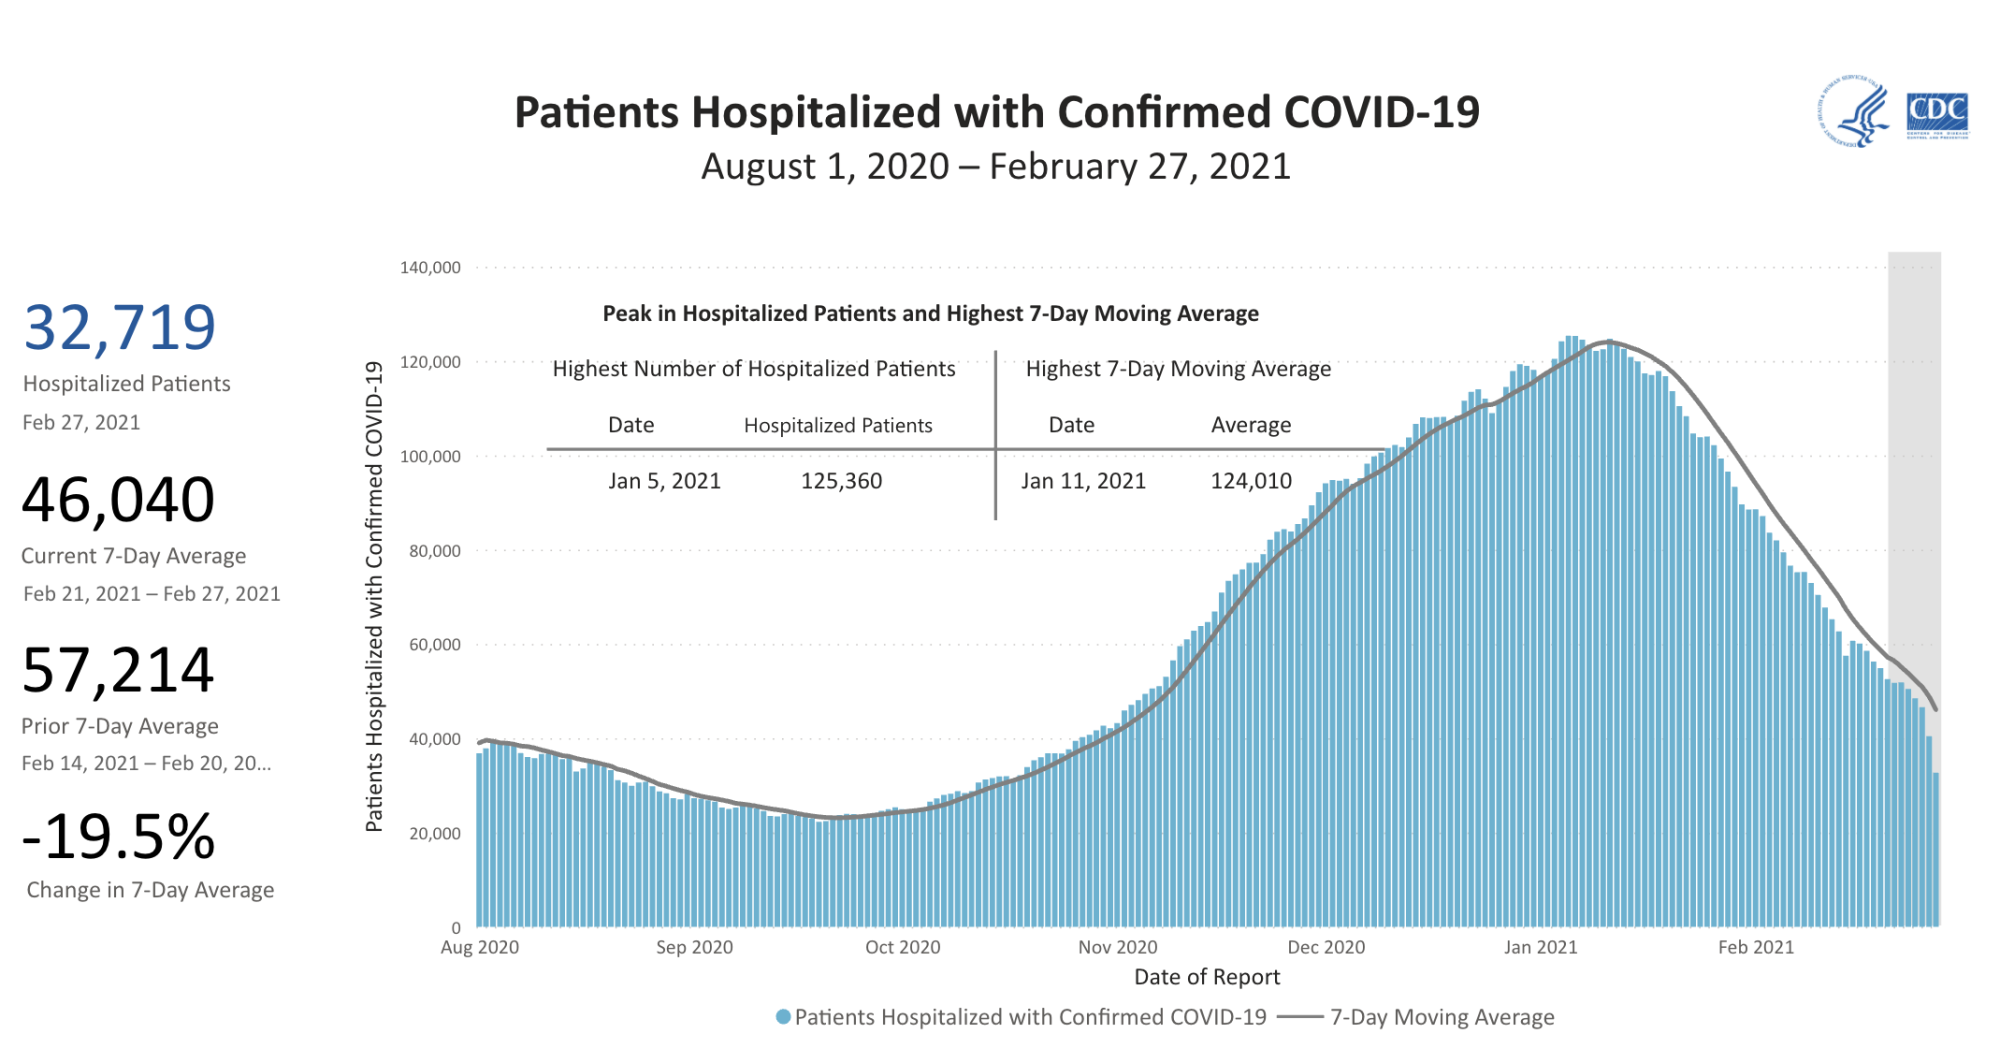 Chart showing the 7-day moving average of patients hospitalized with confirmed COVID-19 over time from August 1, 2020 through February 27, 2021. The chart begins with a value of about 40,000 in August 2020, rises to a peak of about 125,000 in January 2021, and gives the most recent 7-day average of hospitalized patients as 46,040, a decrease of 19% over the previous week.